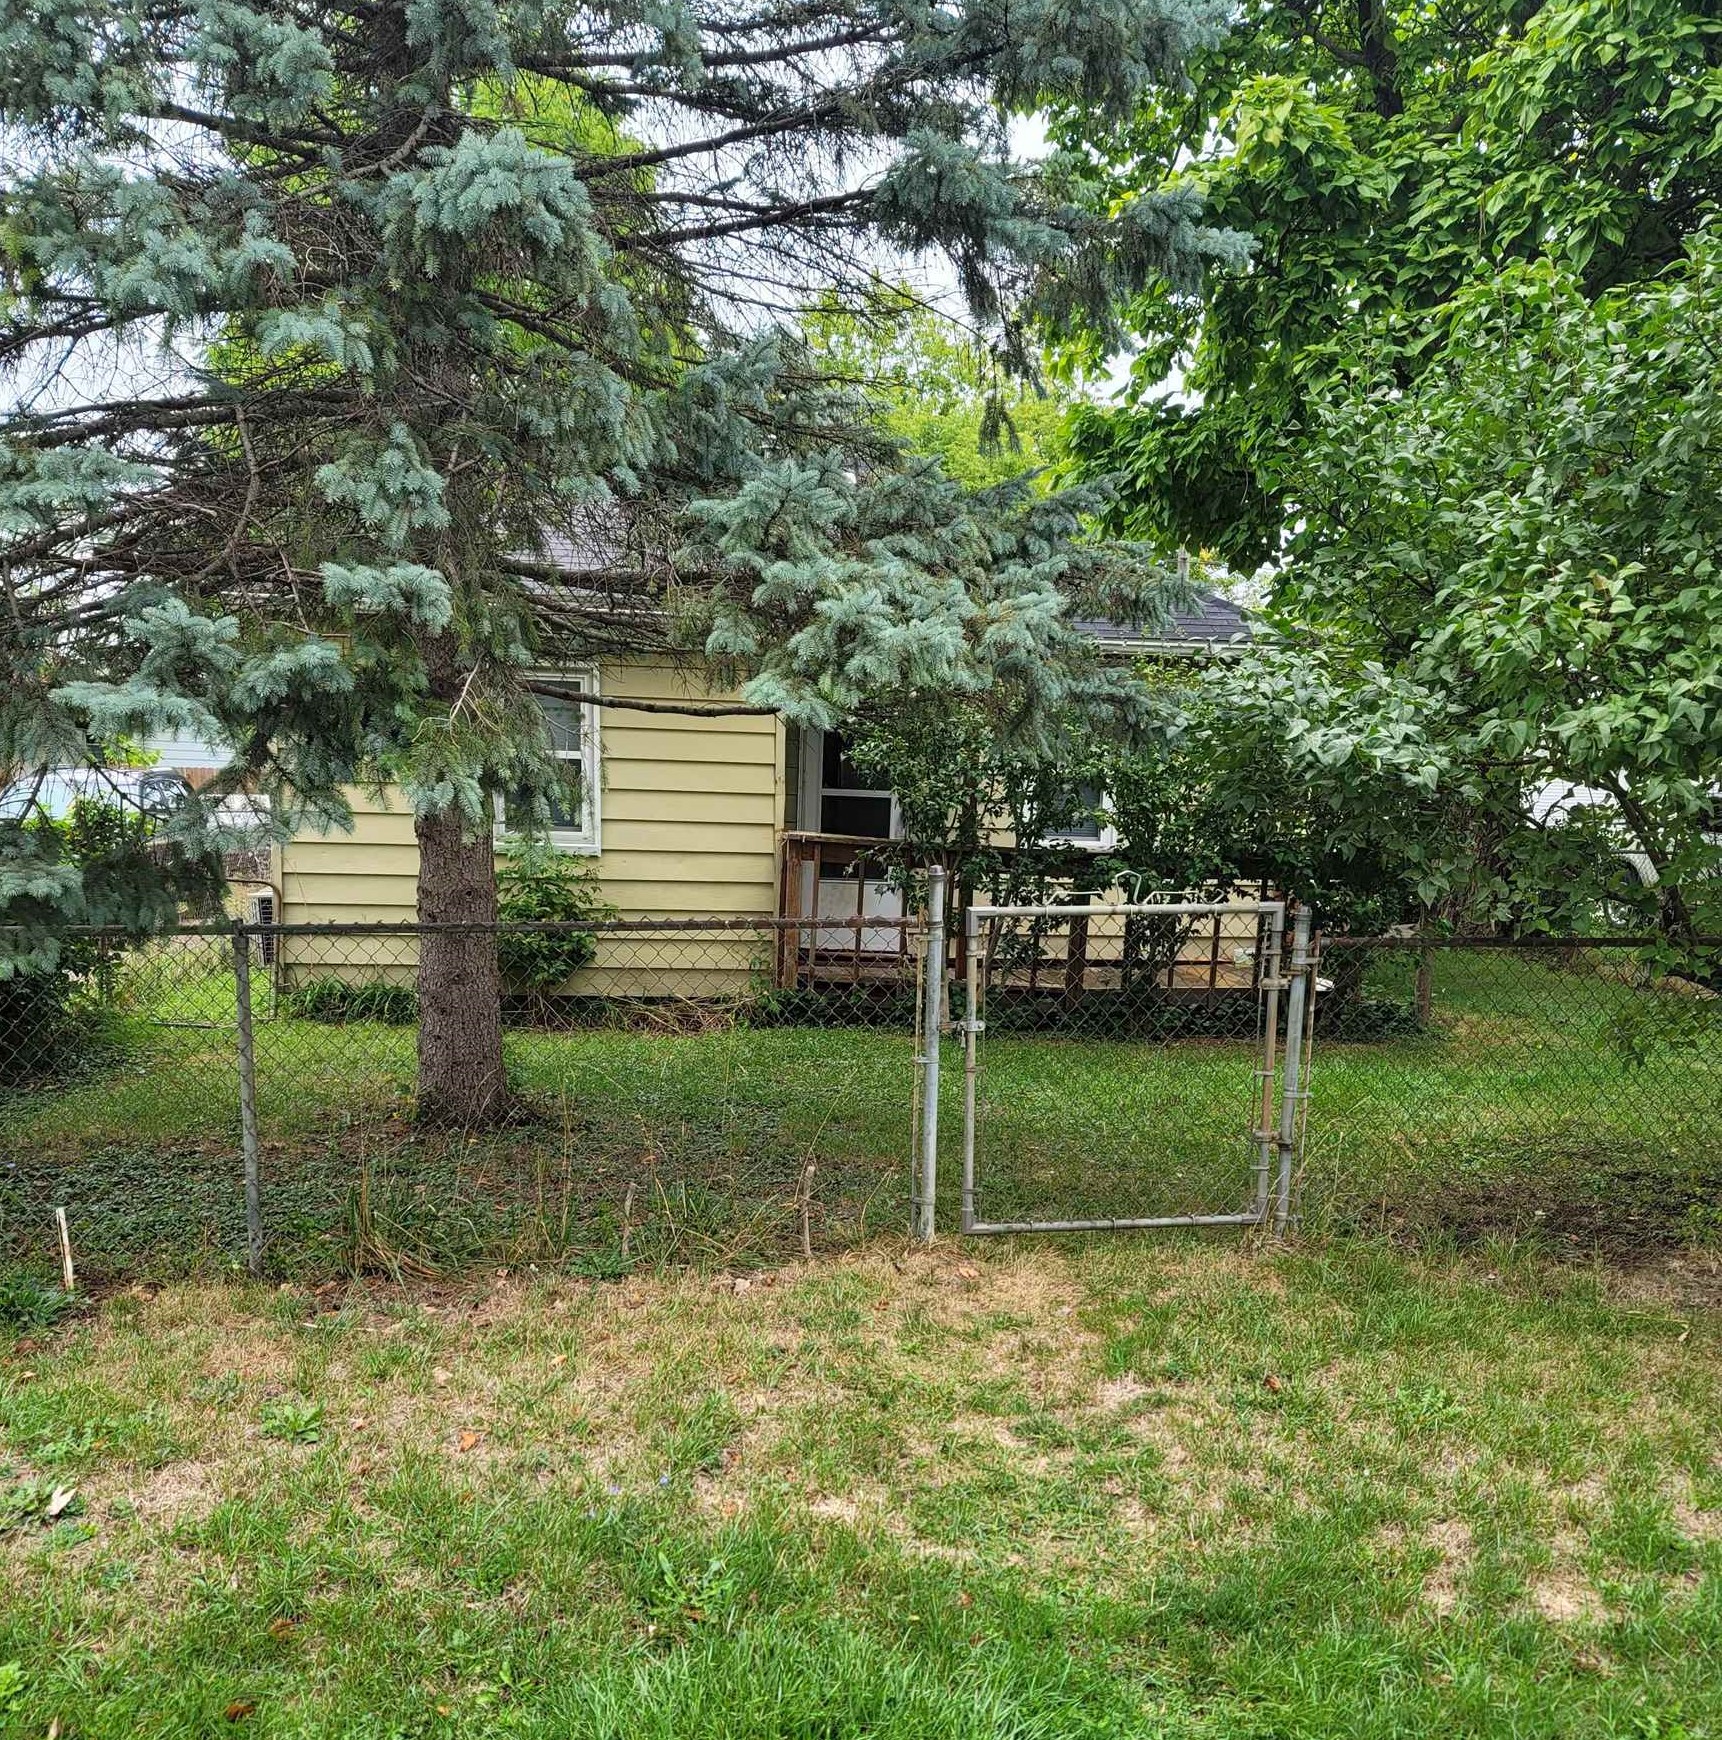 Attention investors!! Cozy Burton 3-bedroom home with potential. Could be a great starter home or rental property. Conveniently located near shopping, schools, public transit, and highways. Home needs finishes/repairs. Cash only.